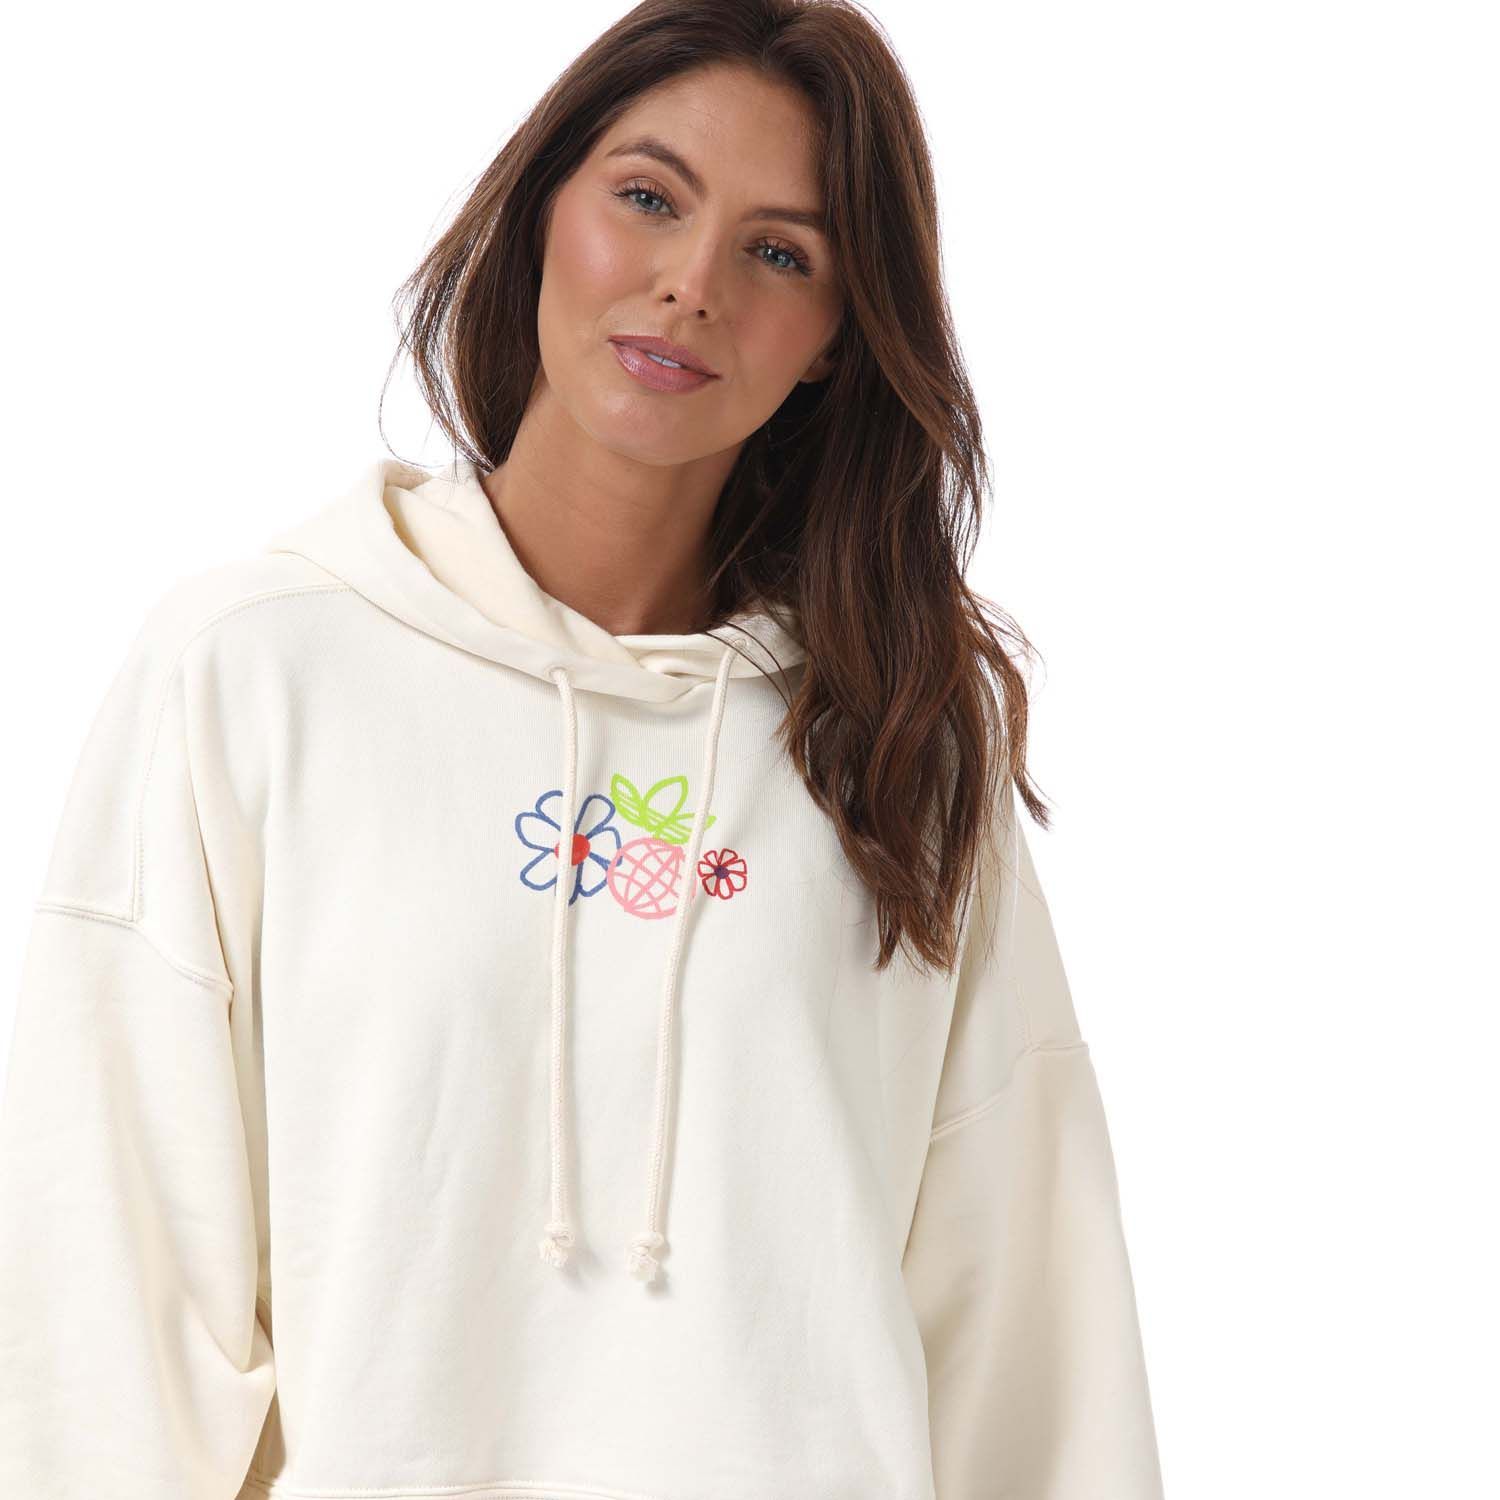 Womens adidas Originals Adicolor Essentials Hoody in natural.- Lined drawcord hood.- Drop shoulders.- Ribbed cuffs and hem.- Printed branding.- Cropped length.- Loose fit.- Main Material: 100% Organic Cotton. Hood Lining: 100% Organic Cotton. - Ref: GP3495